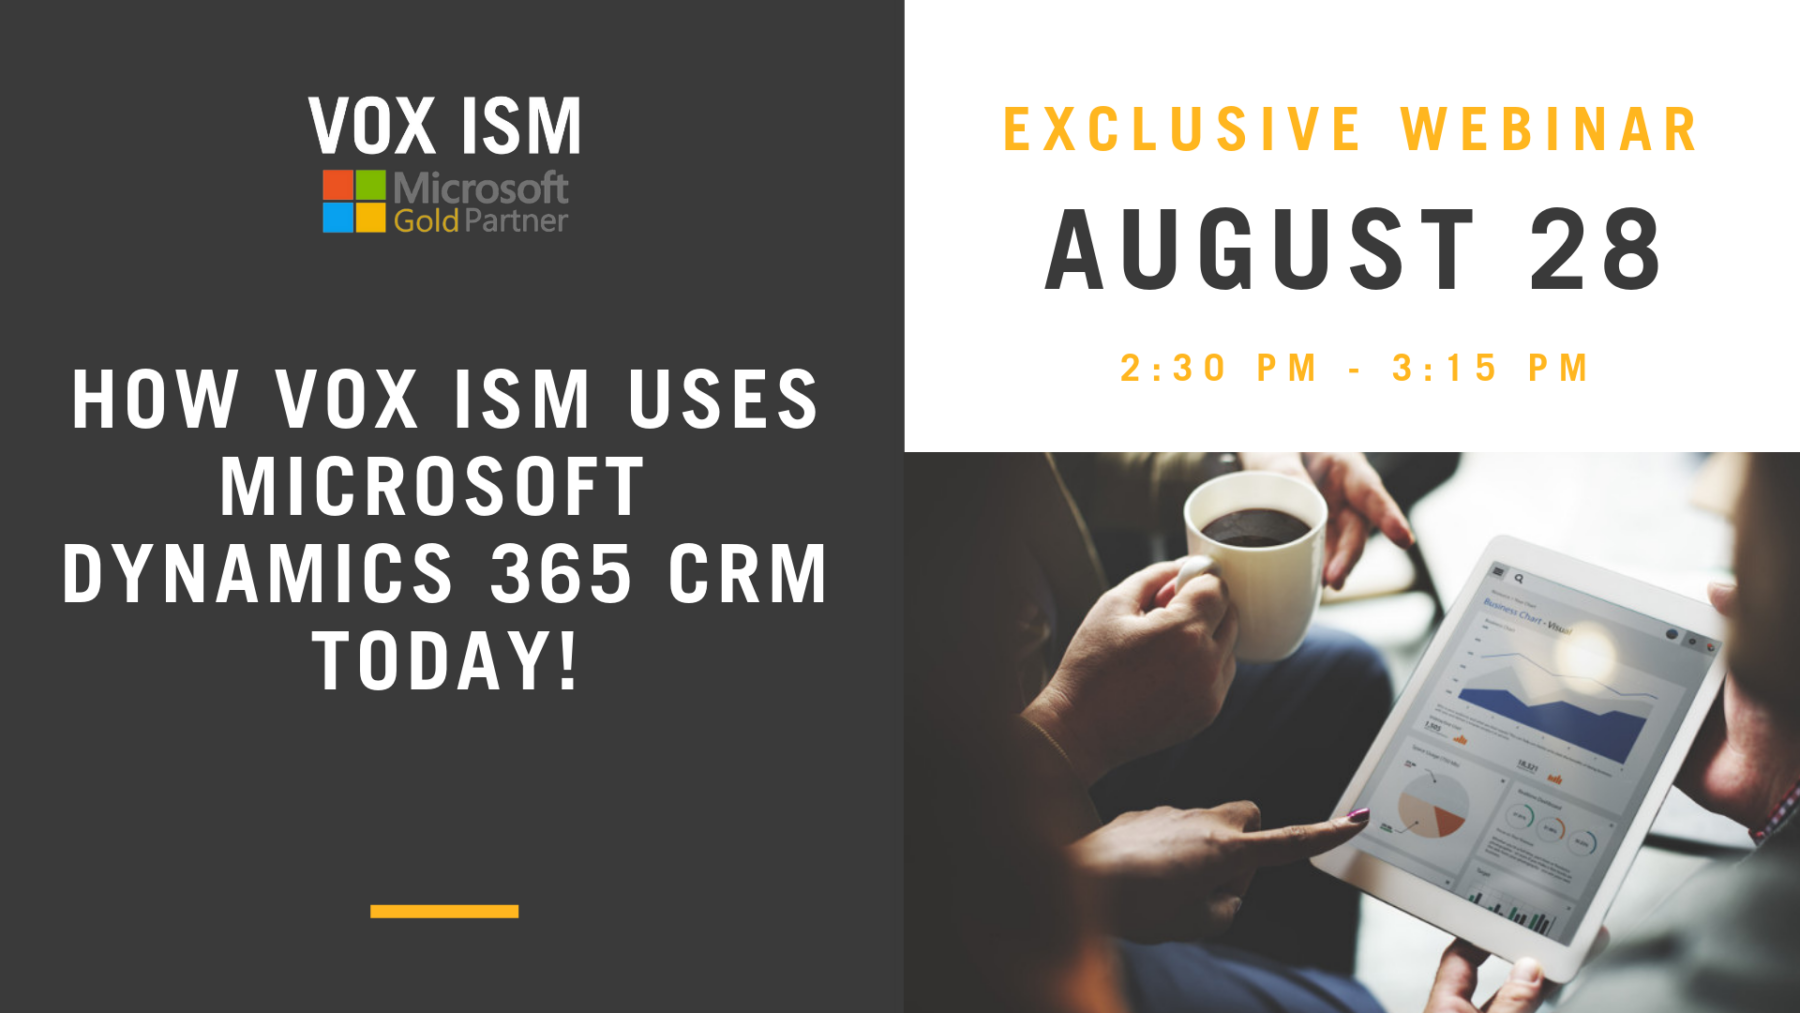 How VOX ISM uses Microsoft Dynamics 365 CRM today - August 28 - Webinar